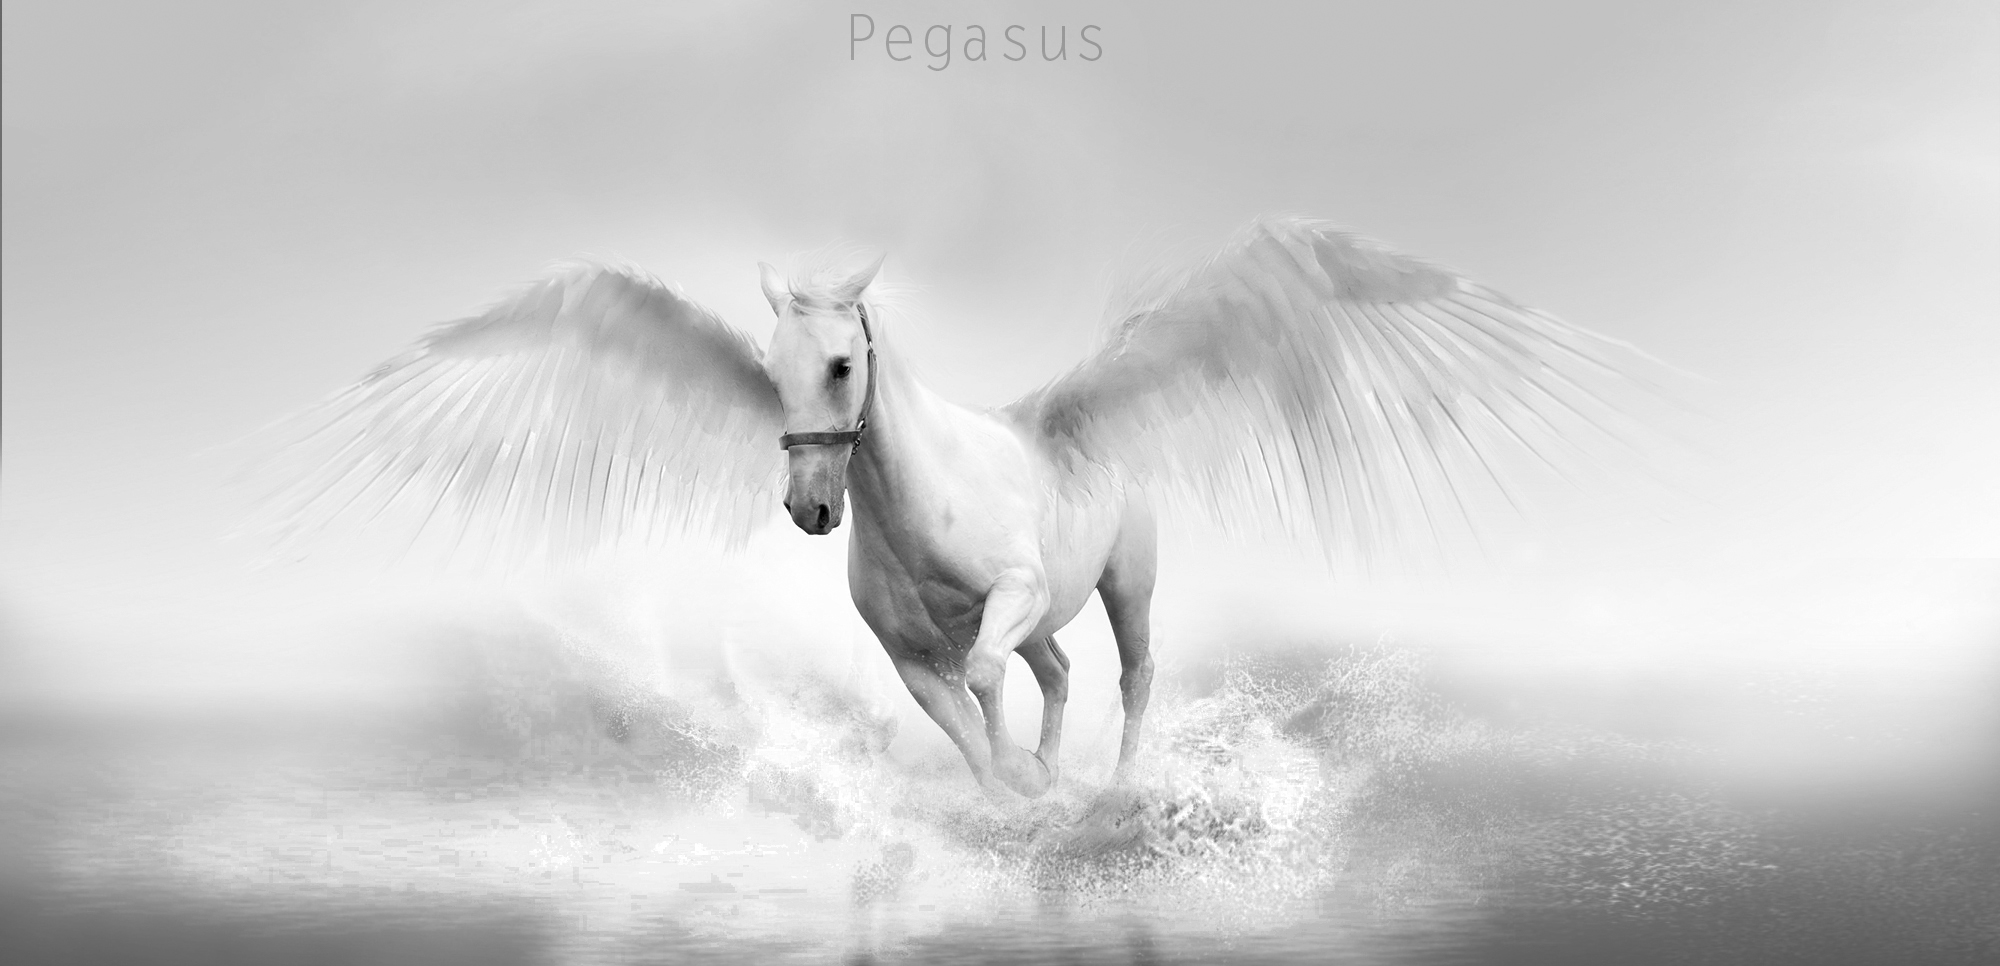 37 Pegasus HD Wallpapers | Backgrounds - Wallpaper Abyss - Page 2